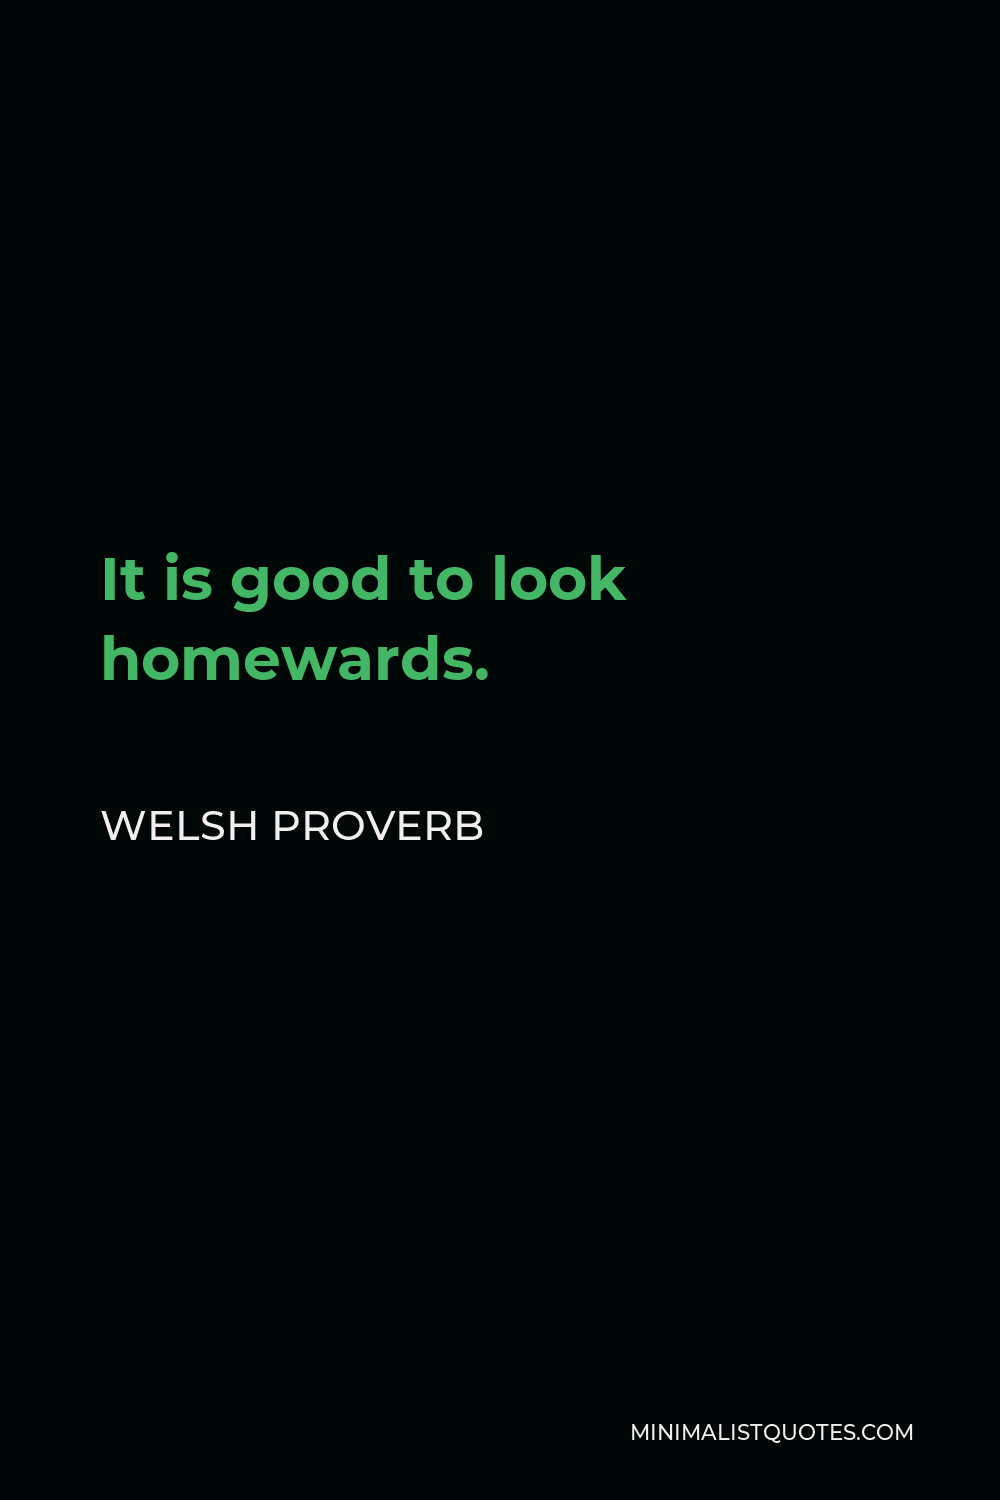 Welsh Proverb Quote - It is good to look homewards.